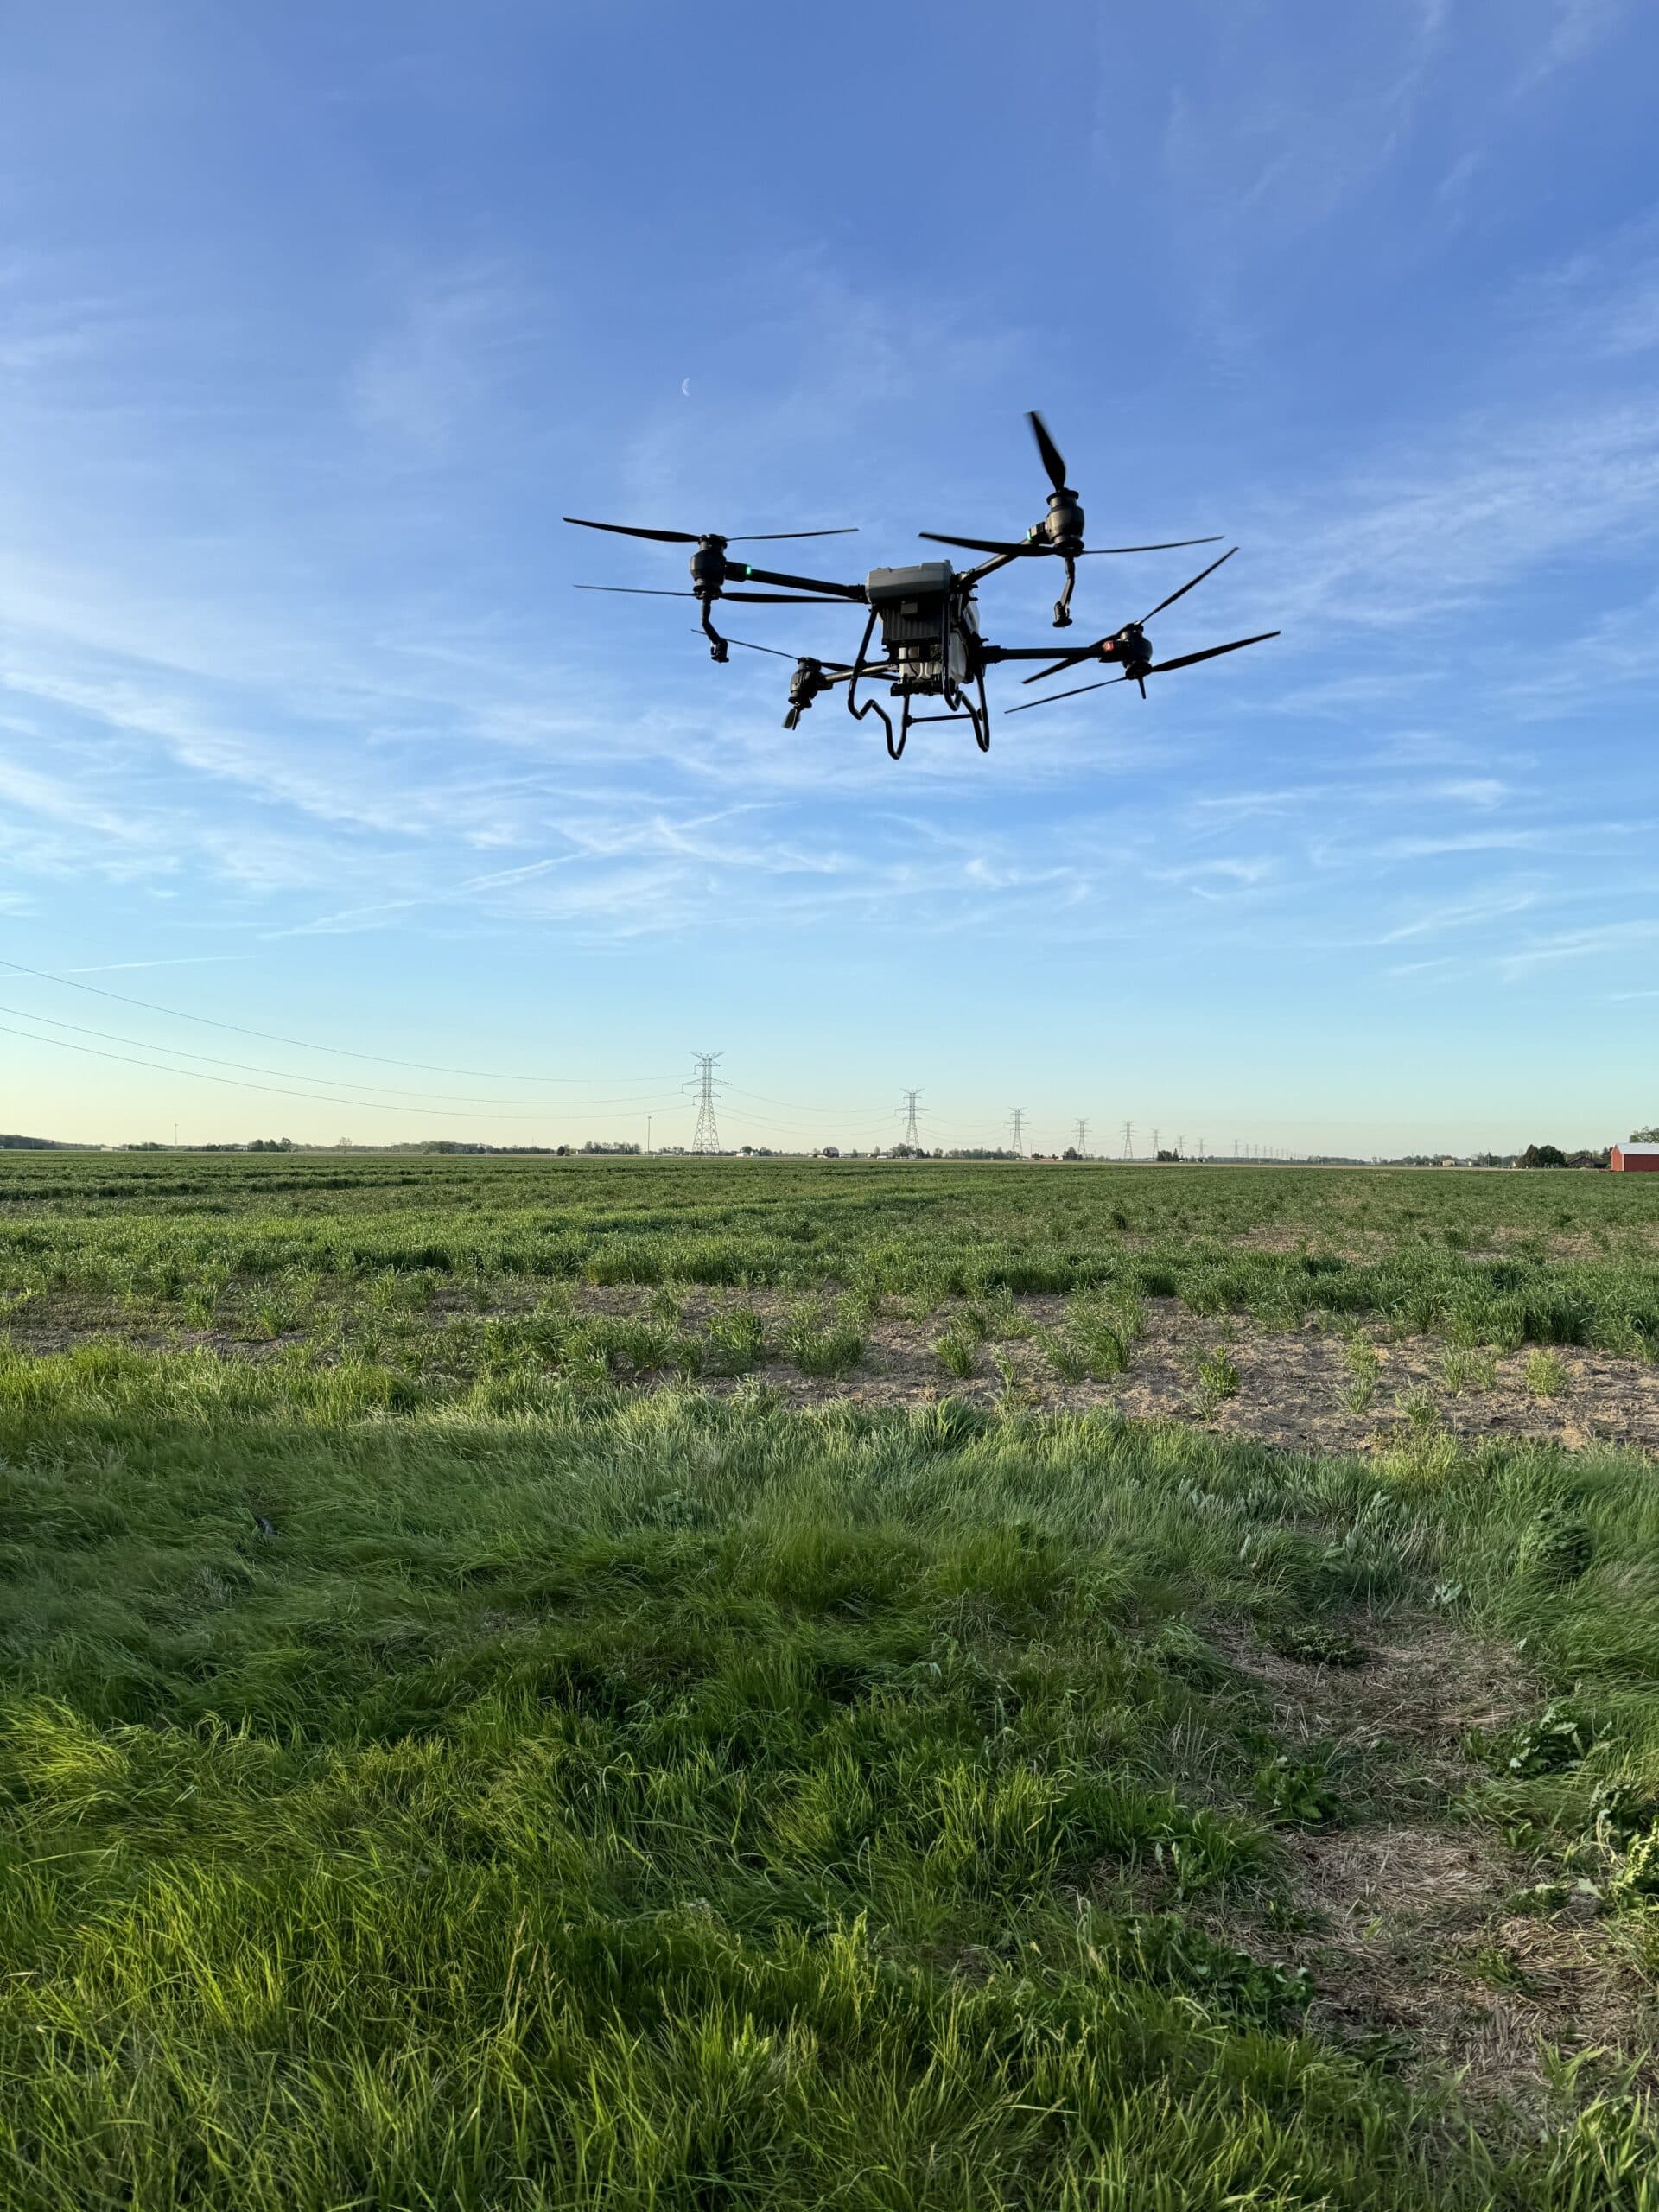 A drone flying over a large grassy field, showcasing its use in precision turf management for accurate application and monitoring.